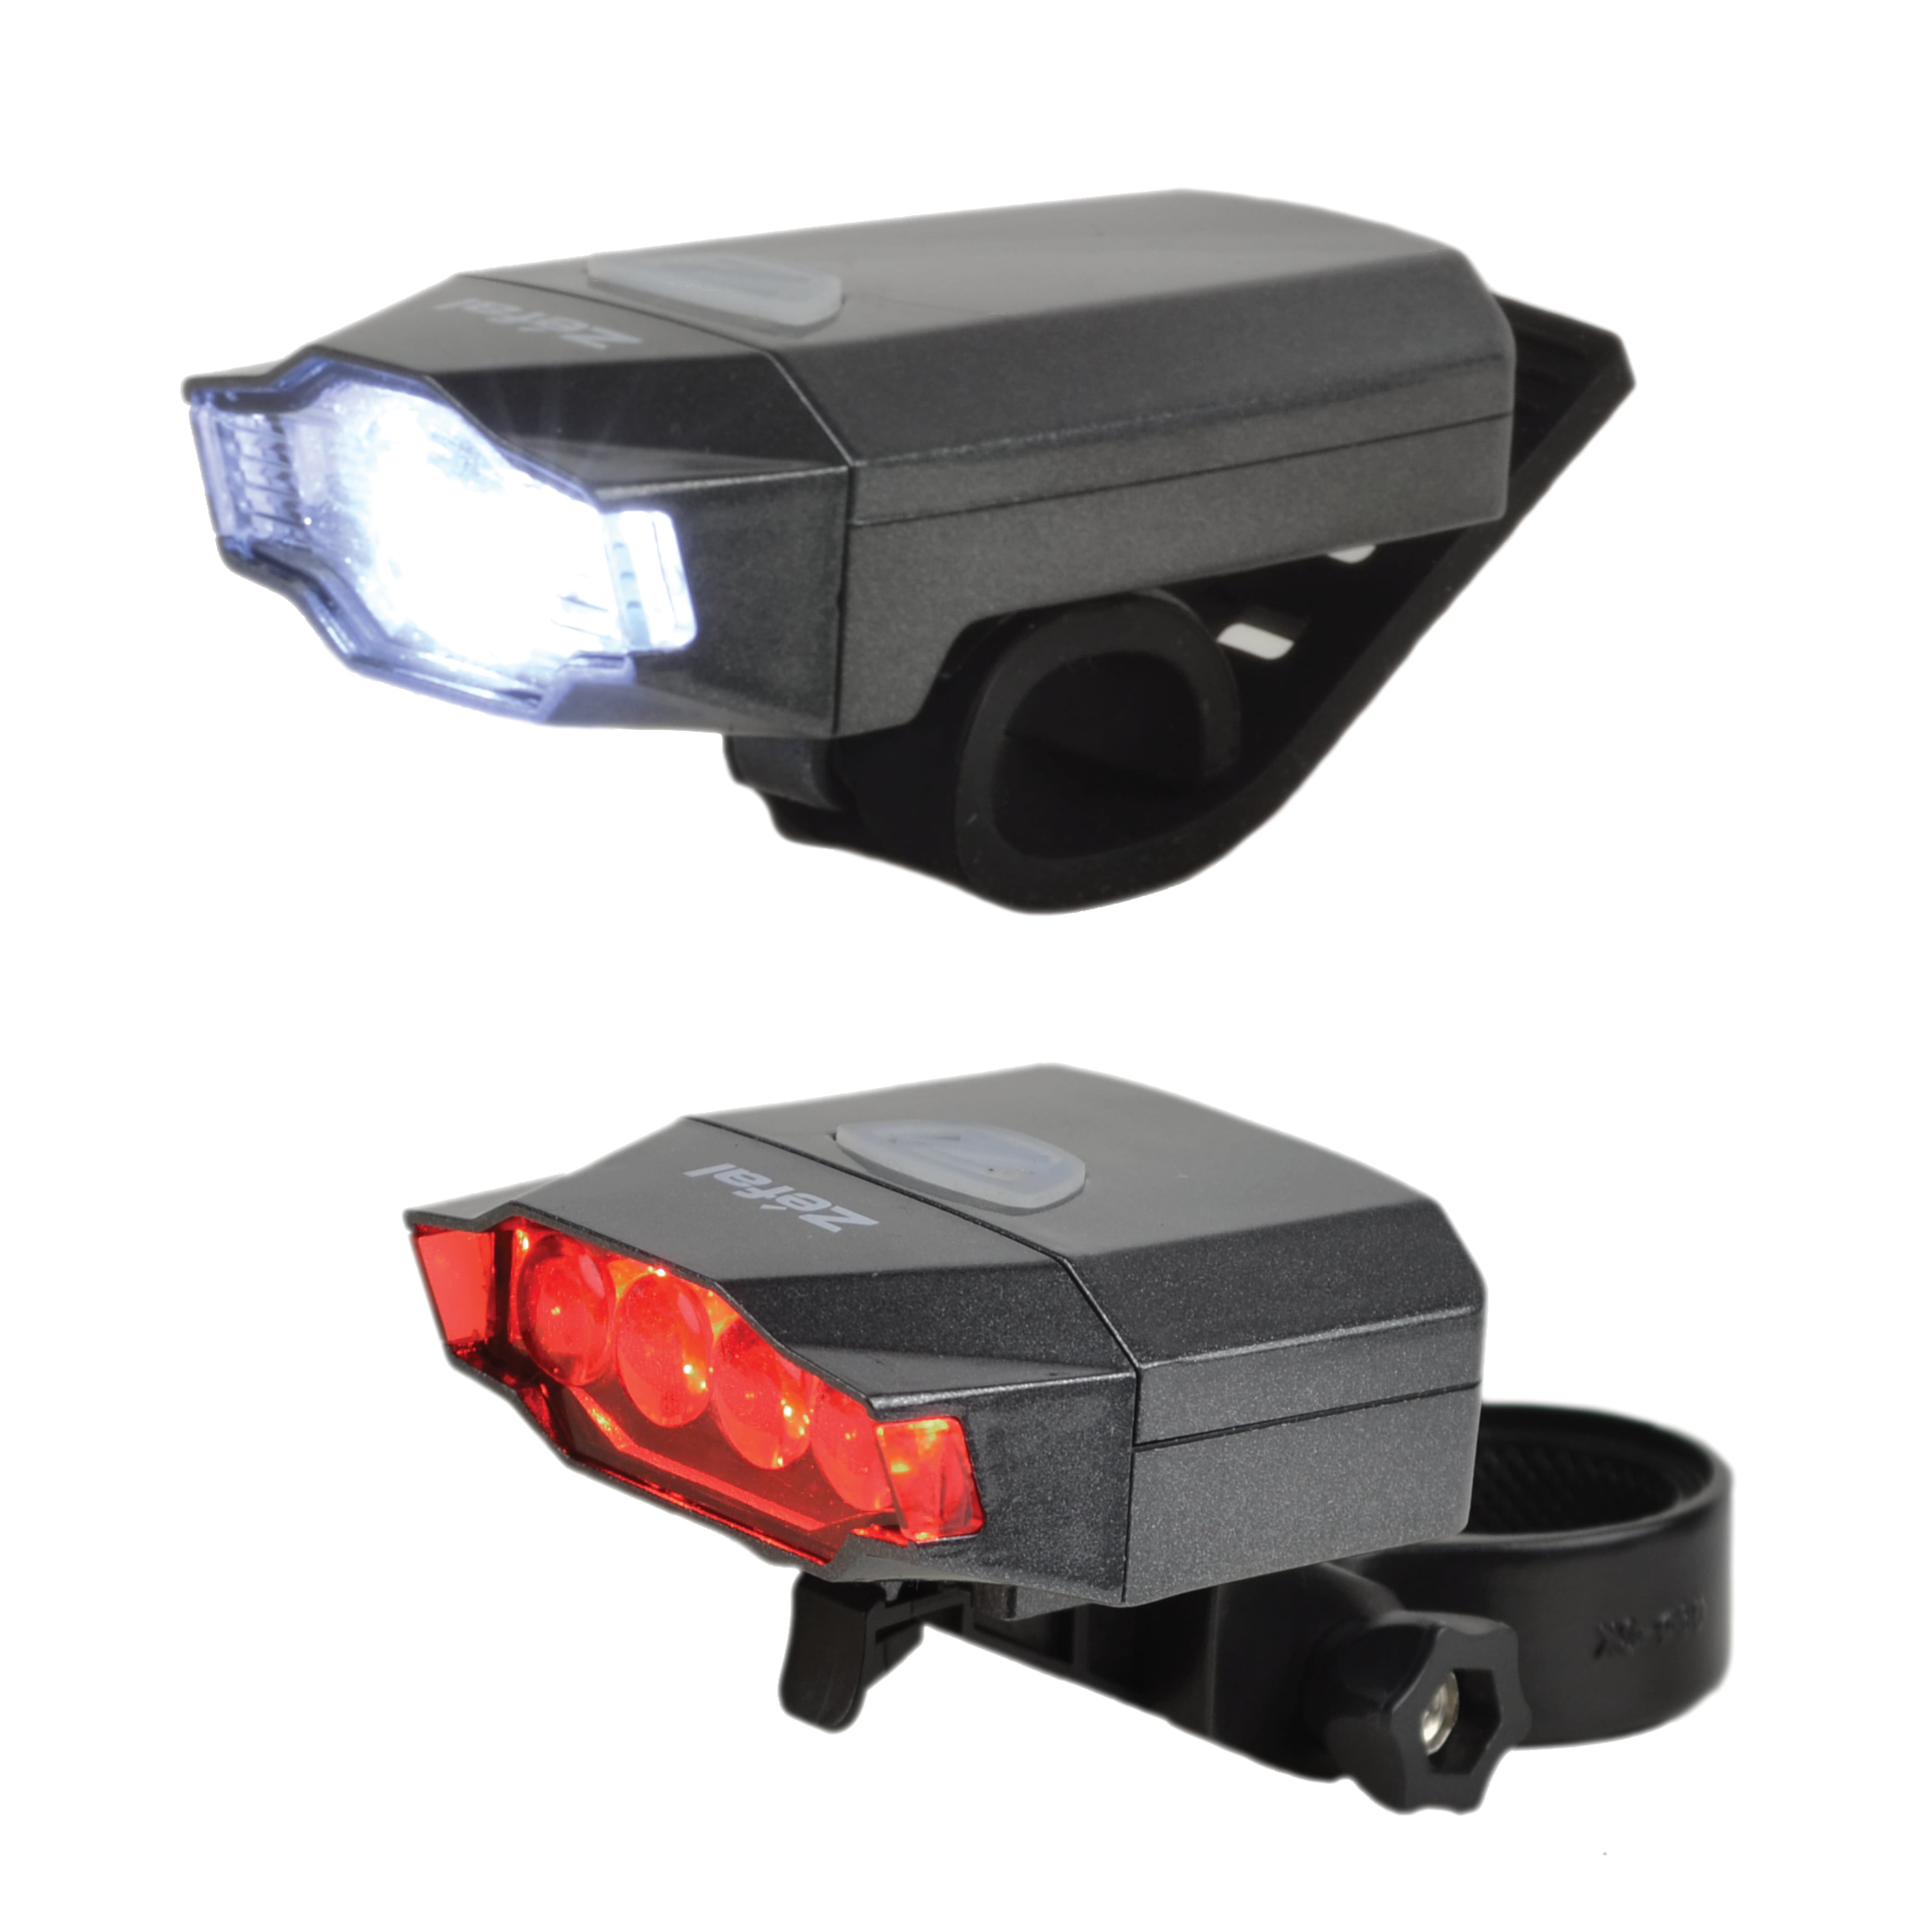 Zefal Manta Deluxe 2.0 Bike Front and Rear Light Set (100 Lumens, No Tools, Multiple Modes)